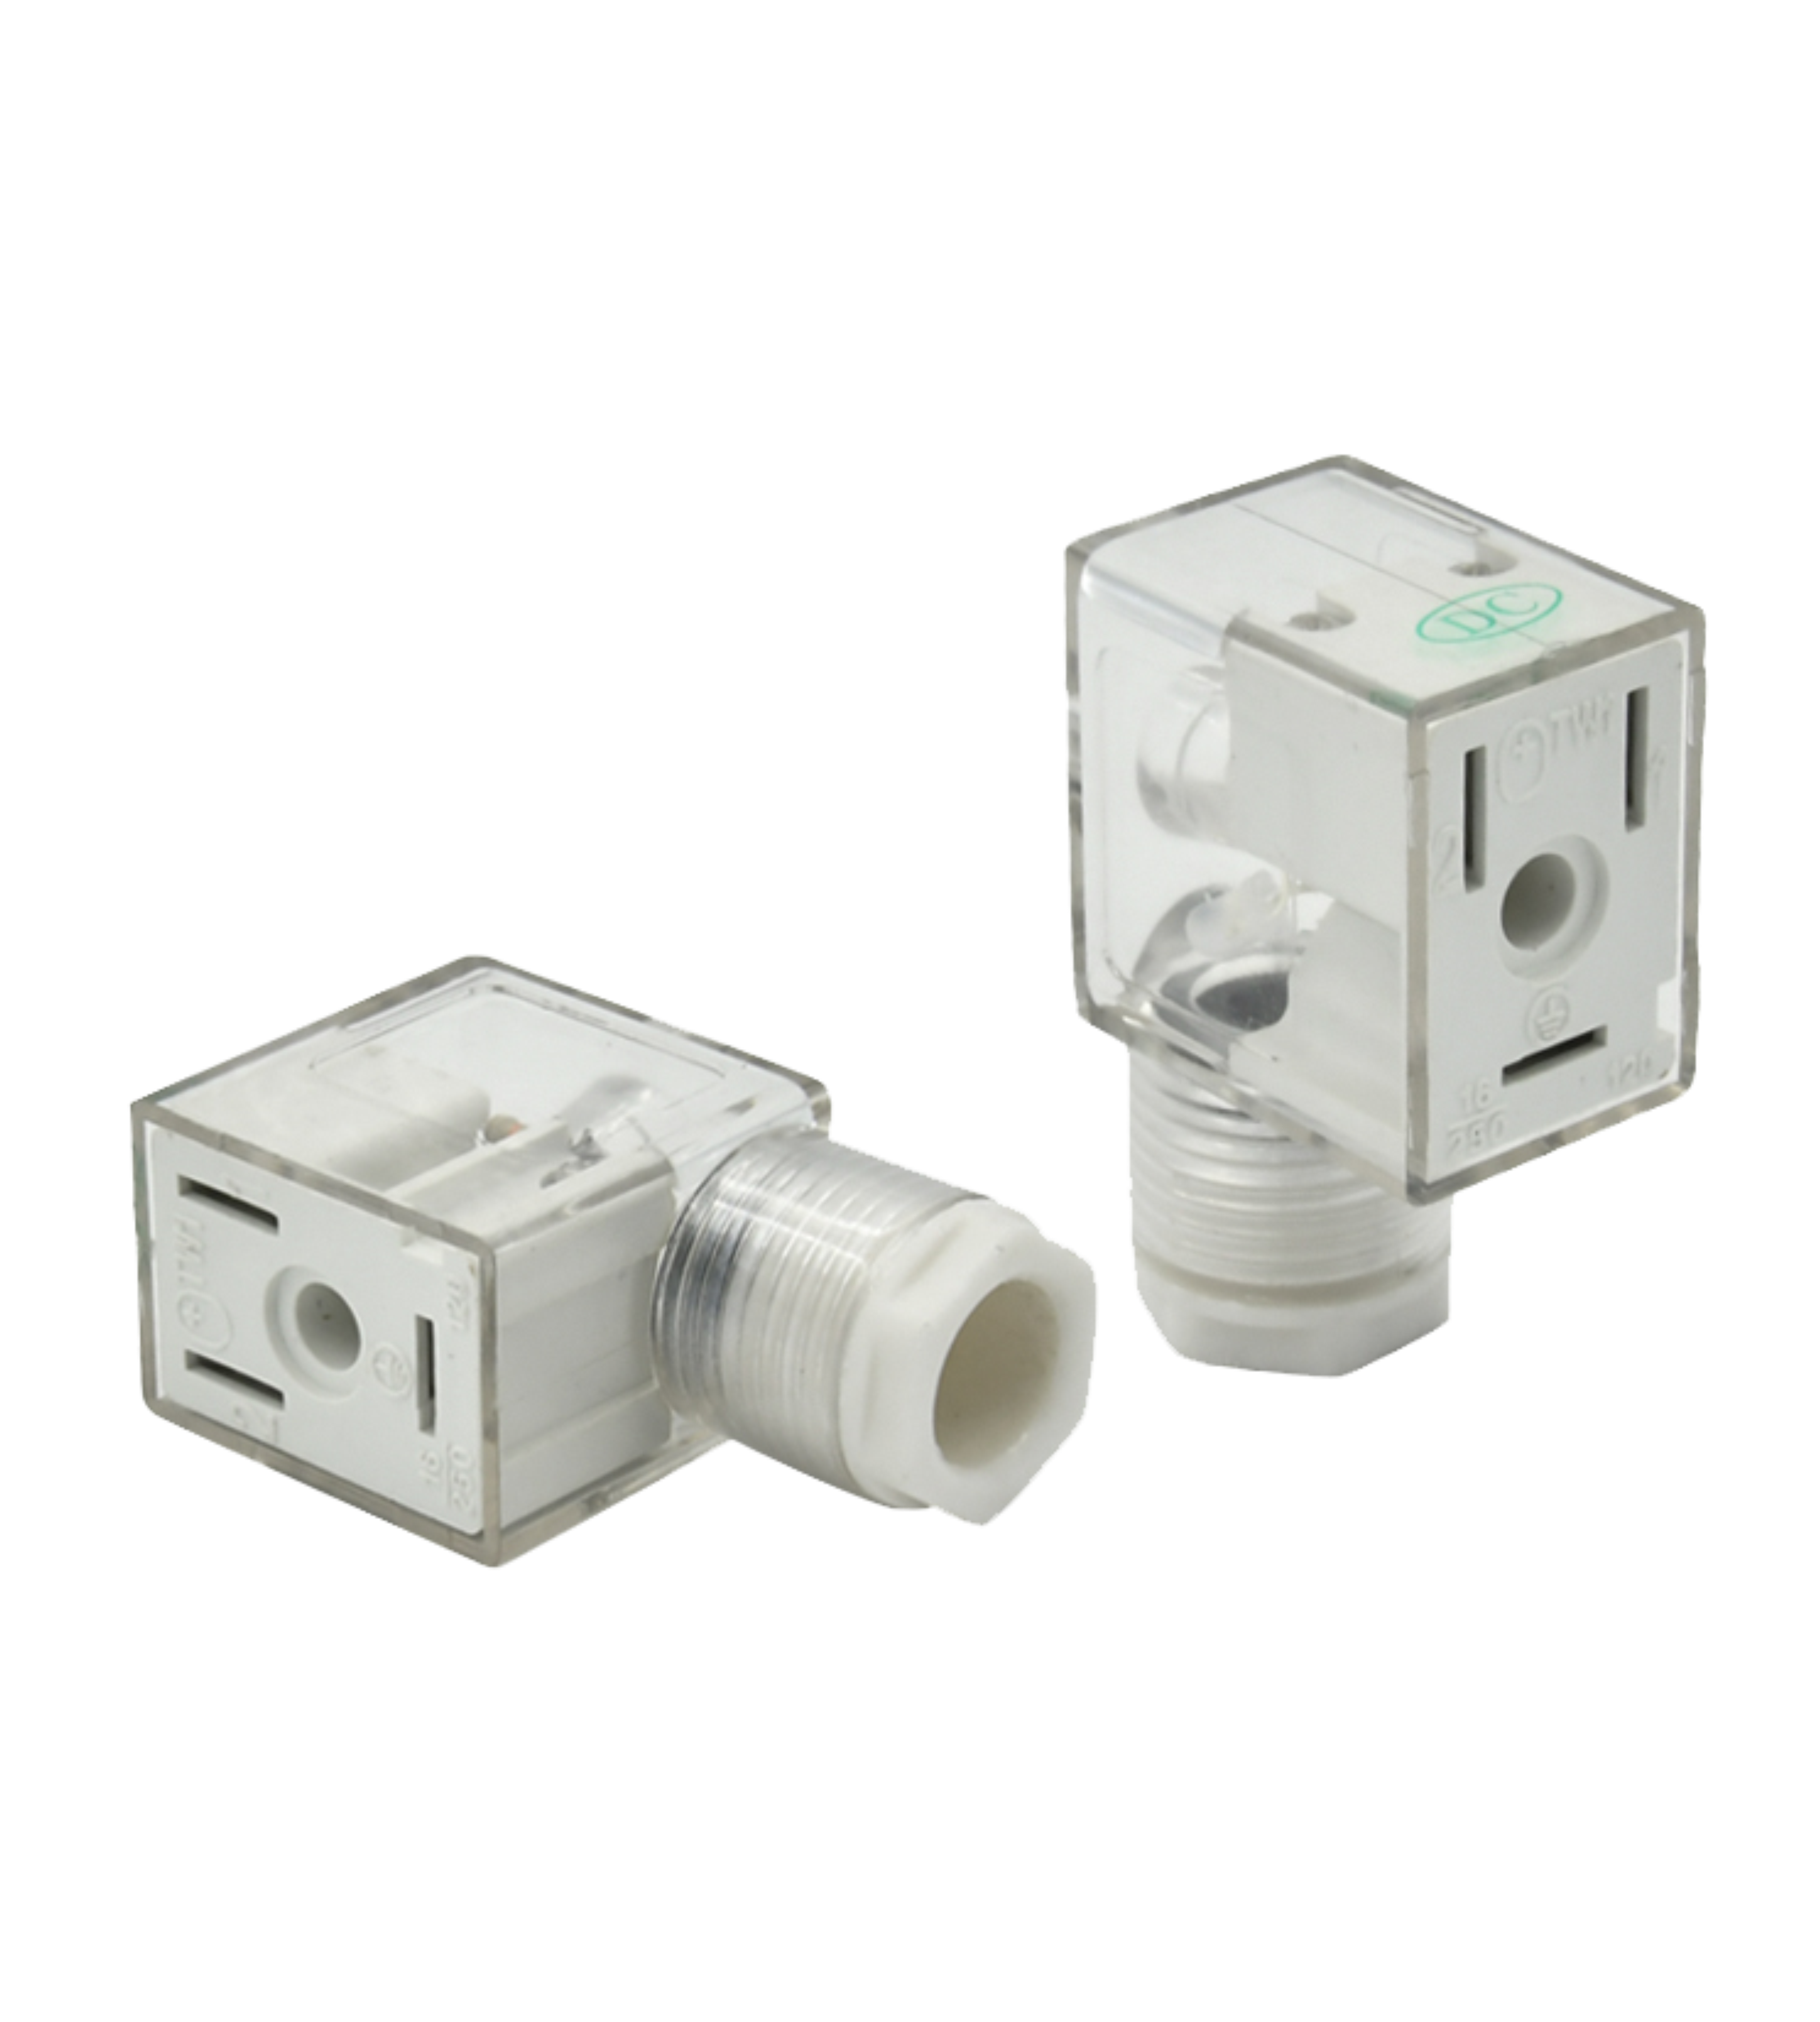 Rigoal's Solenoid Valve Connector: A Game-Changer in Industrial Connectivity